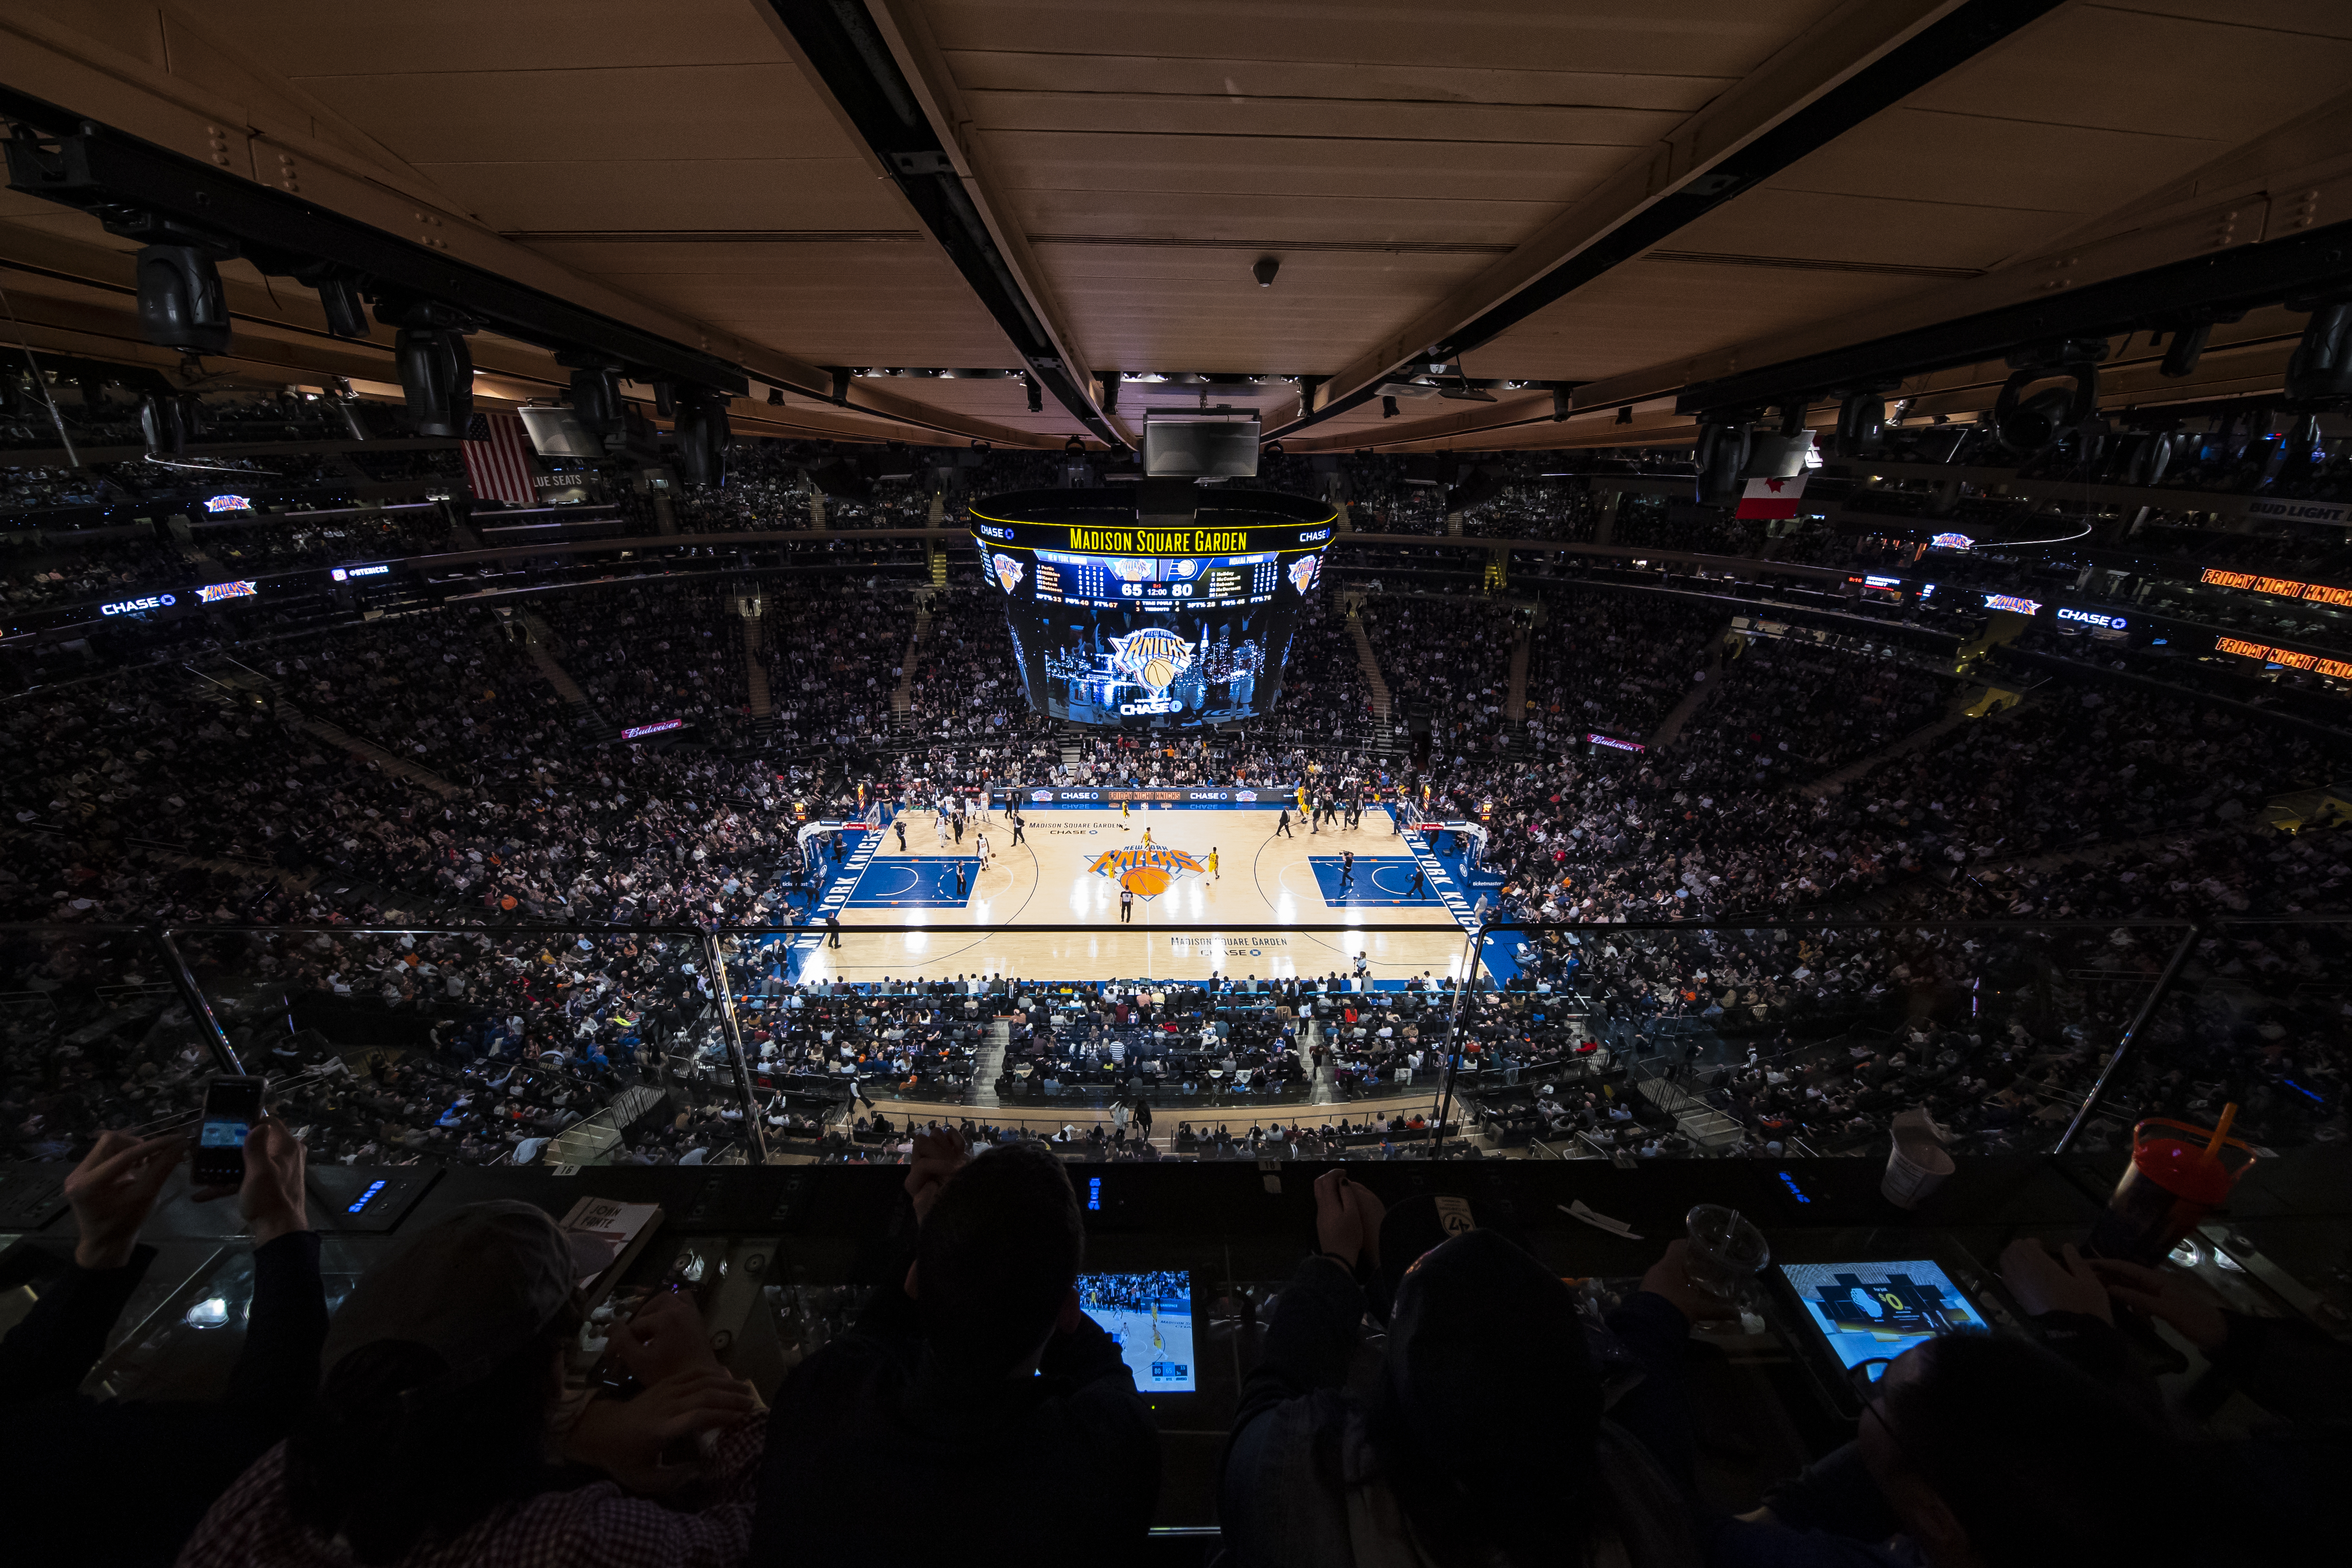 Madison Square Garden Seating Chart - Knicks and Rangers